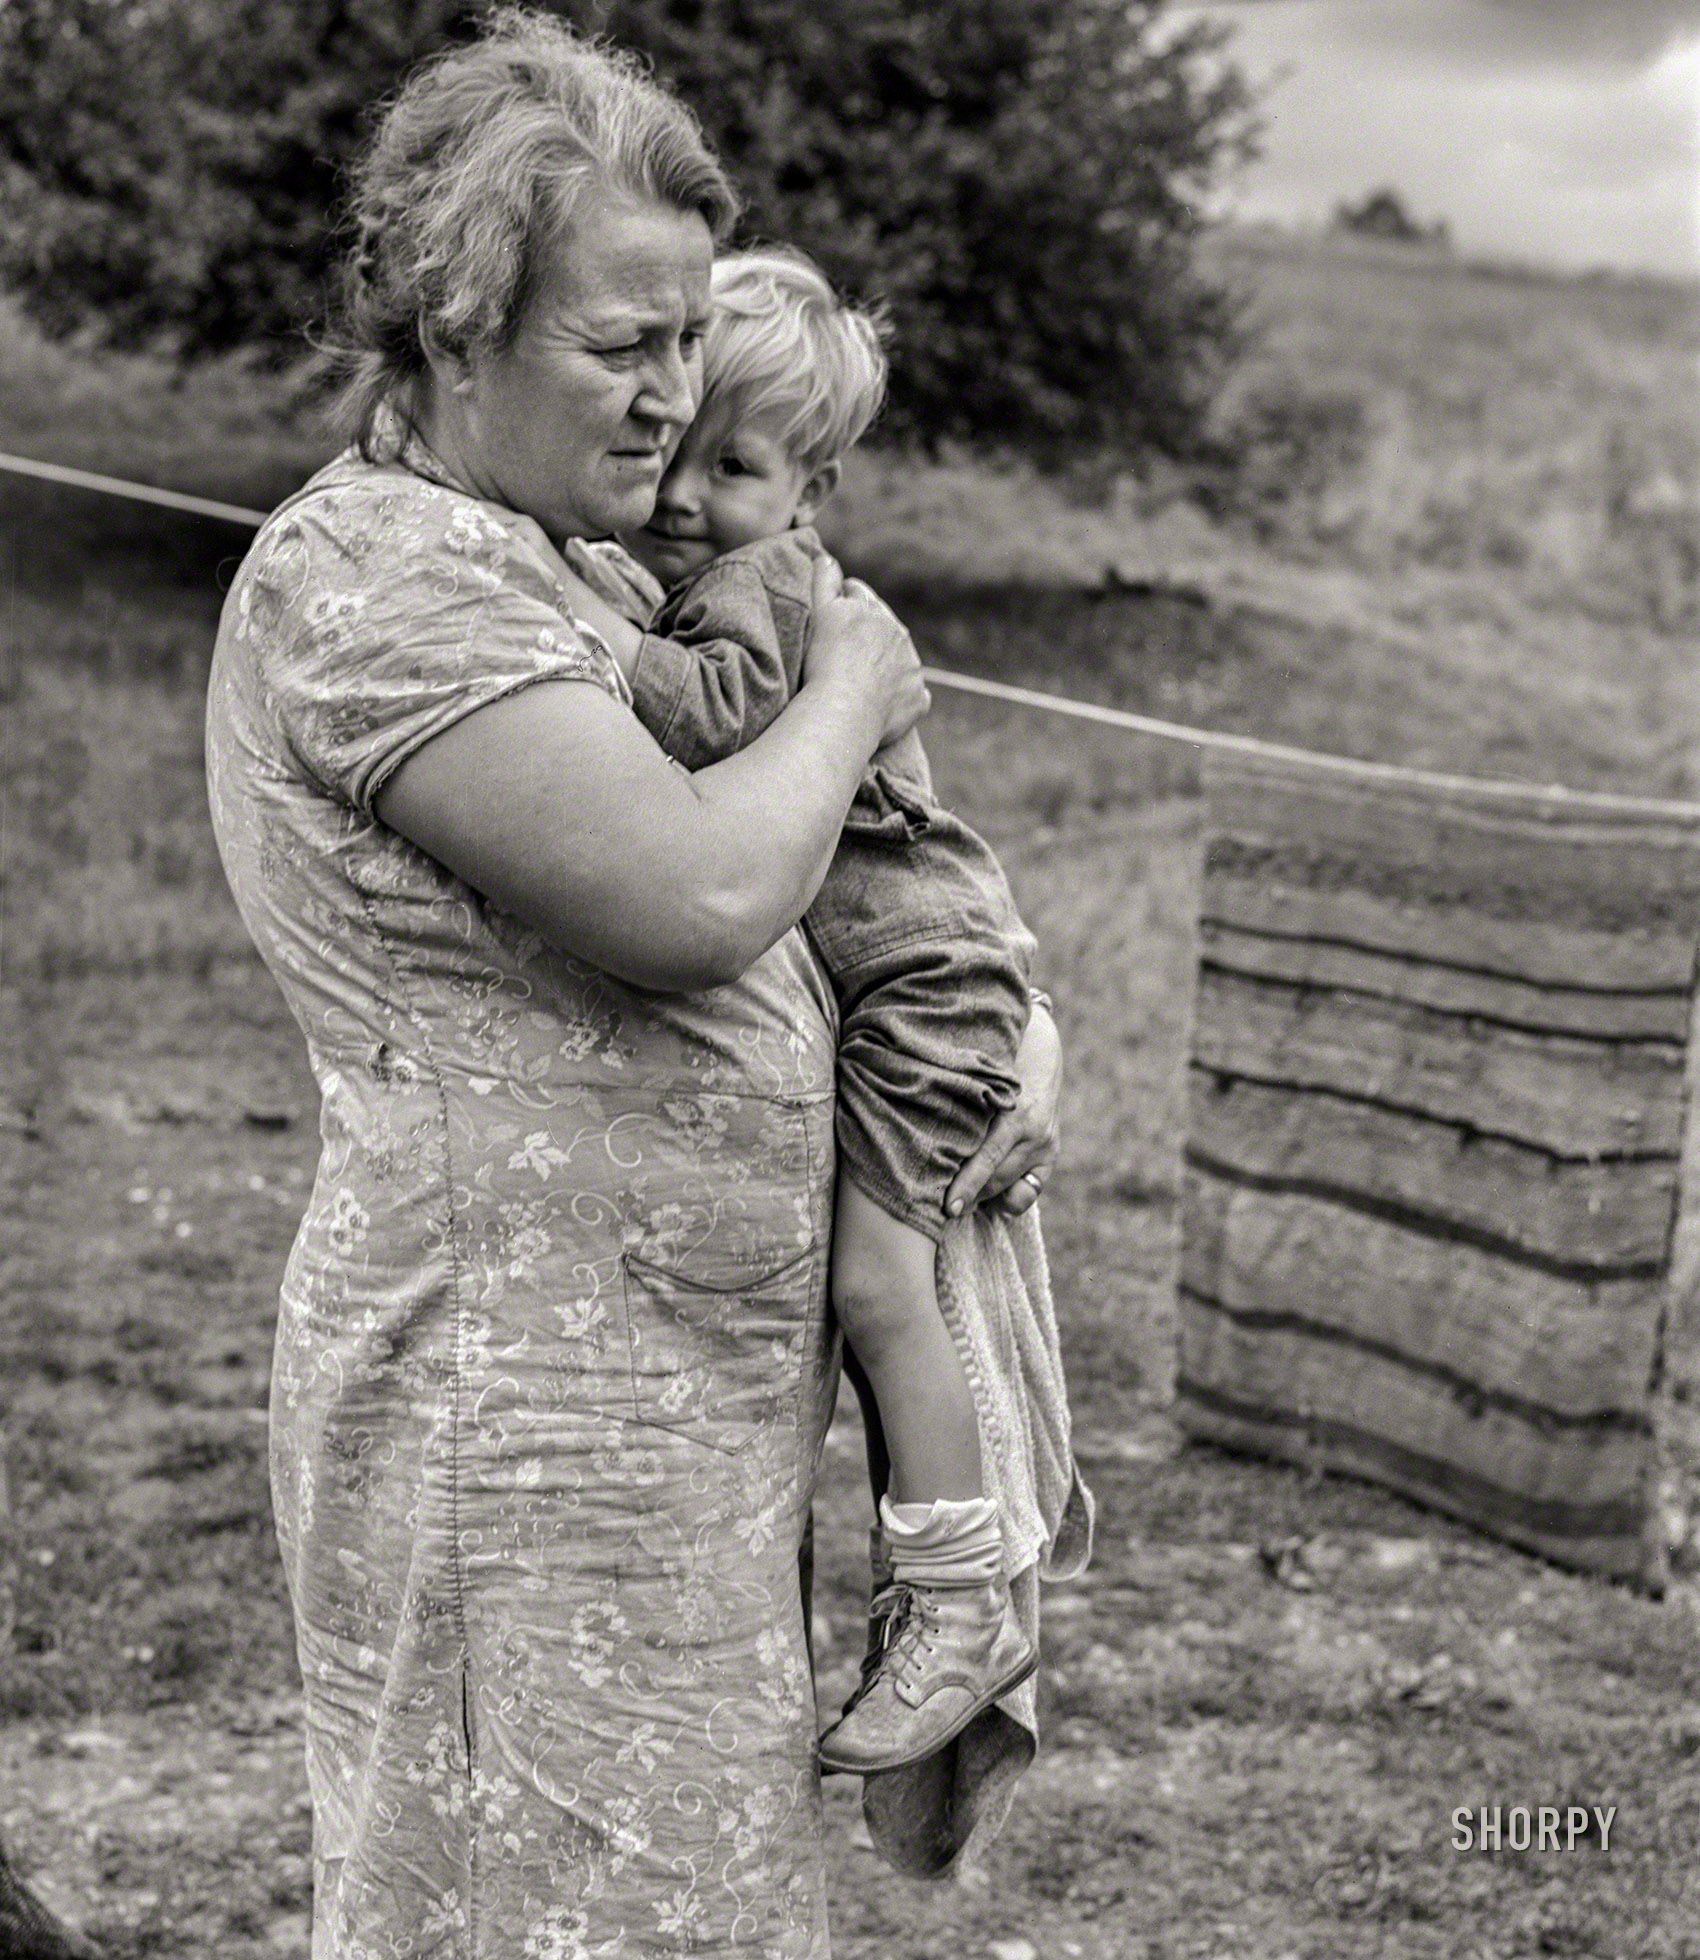 September 1940. "Farm woman holding one of her children in submarginal area of Rumsey Hill, near Erin, New York." Happy Mother's Day from Shorpy! Medium format negative by Jack Delano for the Farm Security Administration. View full size.